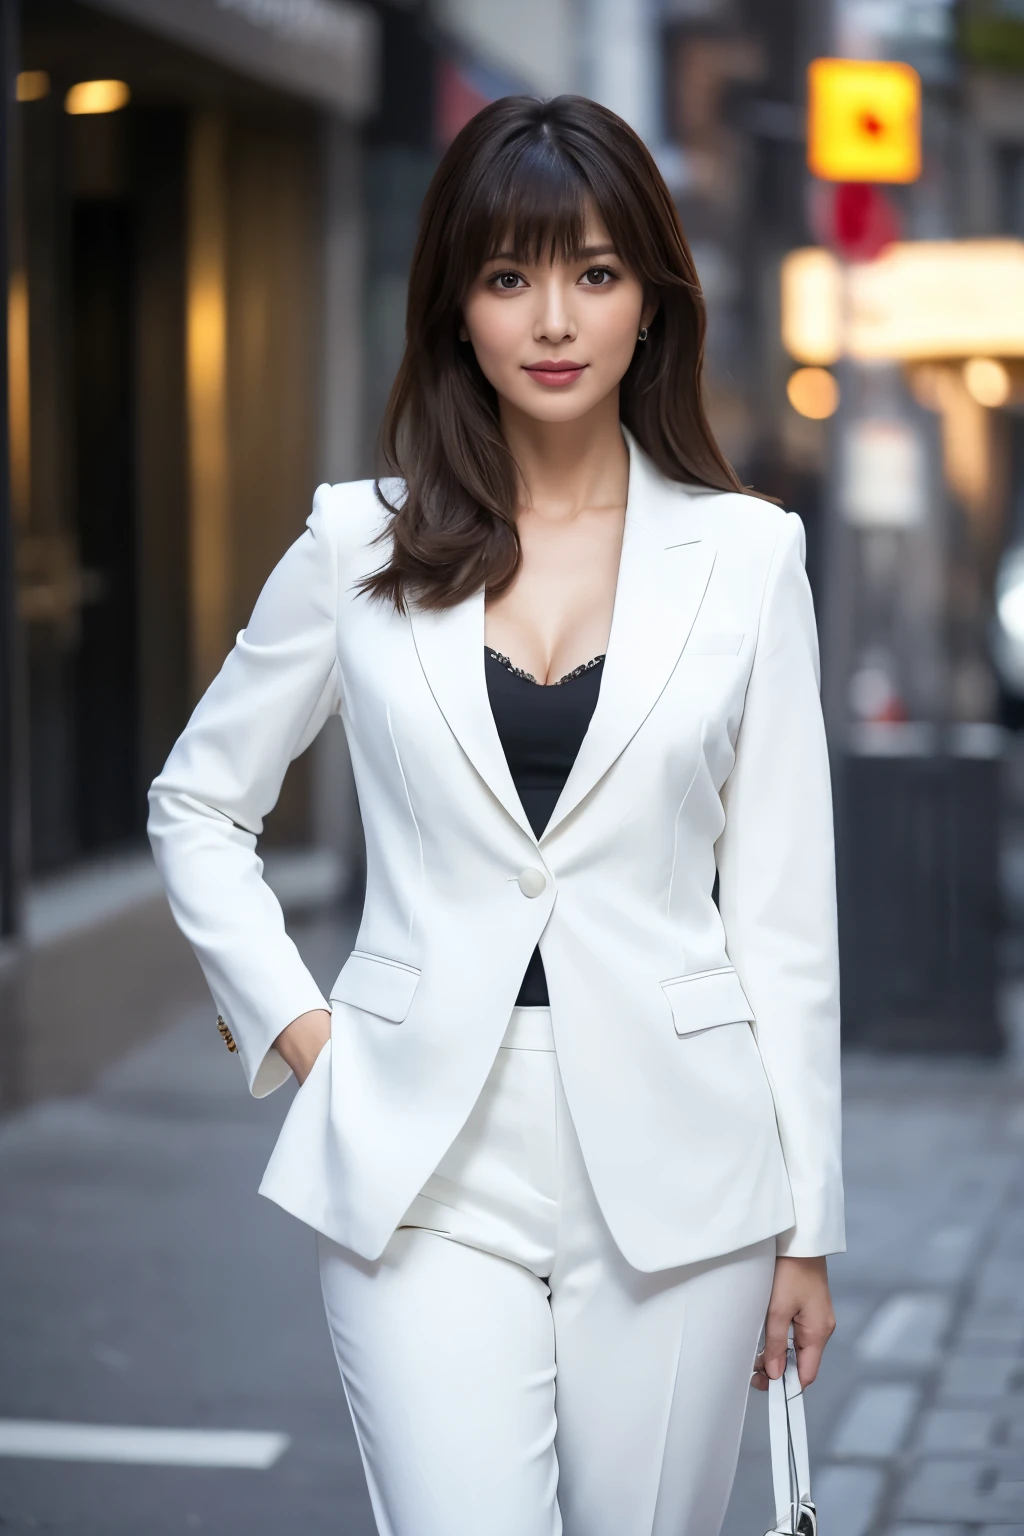 Highest quality, masterpiece, High resolution, Photorealistic, RAW Photos, 8k wallpaper, perfection, Professional Lighting, Very detailed, ((One beautiful woman)), Age 25, ((Elegant white suit)), Shapely breasts, Cleavage, Full Body Shot, White high heels, ((Looking at the camera)), Detailed face, Beautiful Eyes, ((Look forward)), Stand with good posture on a busy street, bangs, Straight Hair, Plump and glossy lips